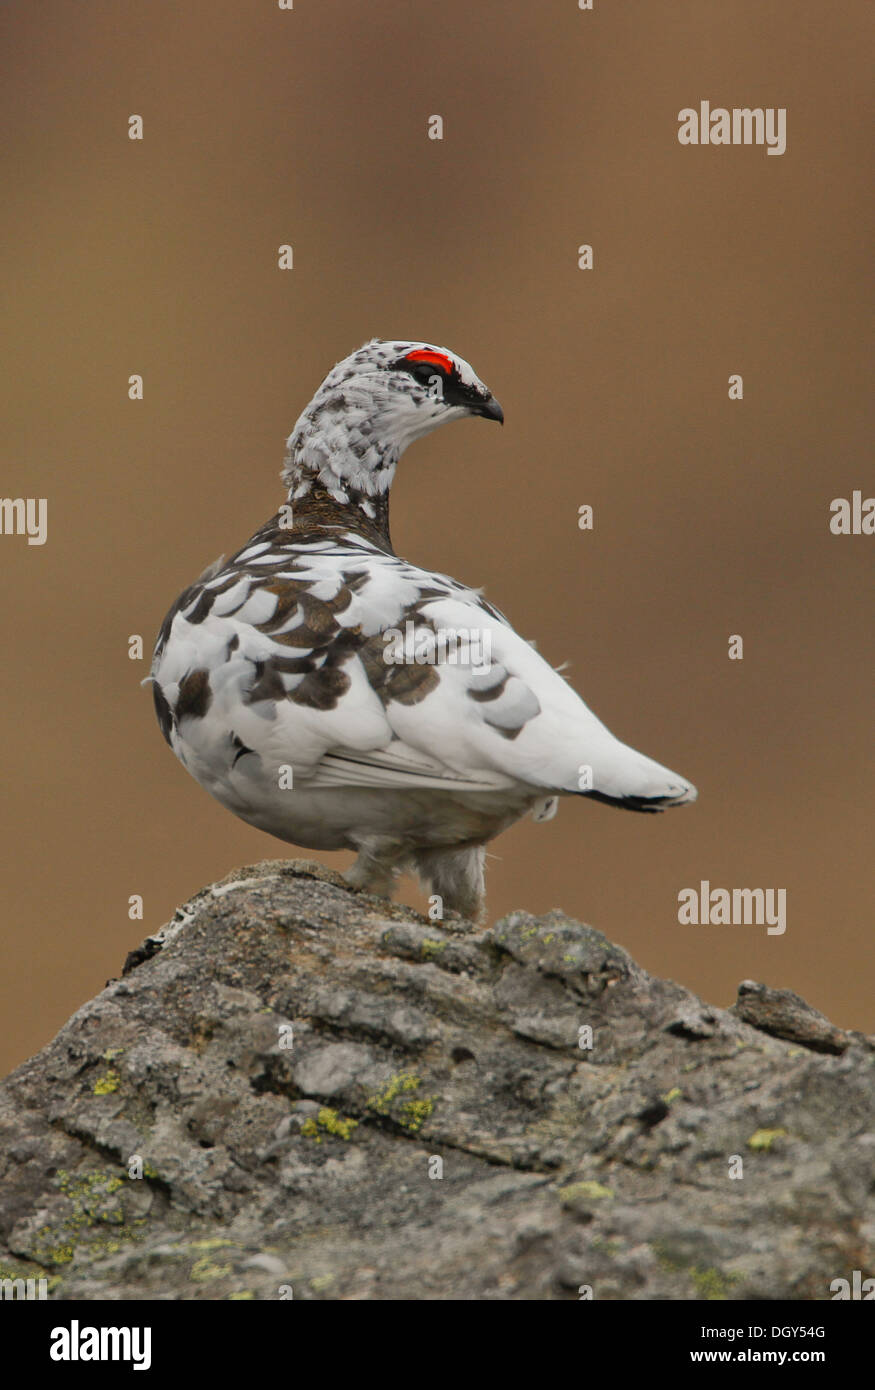 A male ptarmigan posing on a rock with a clean background Stock Photo